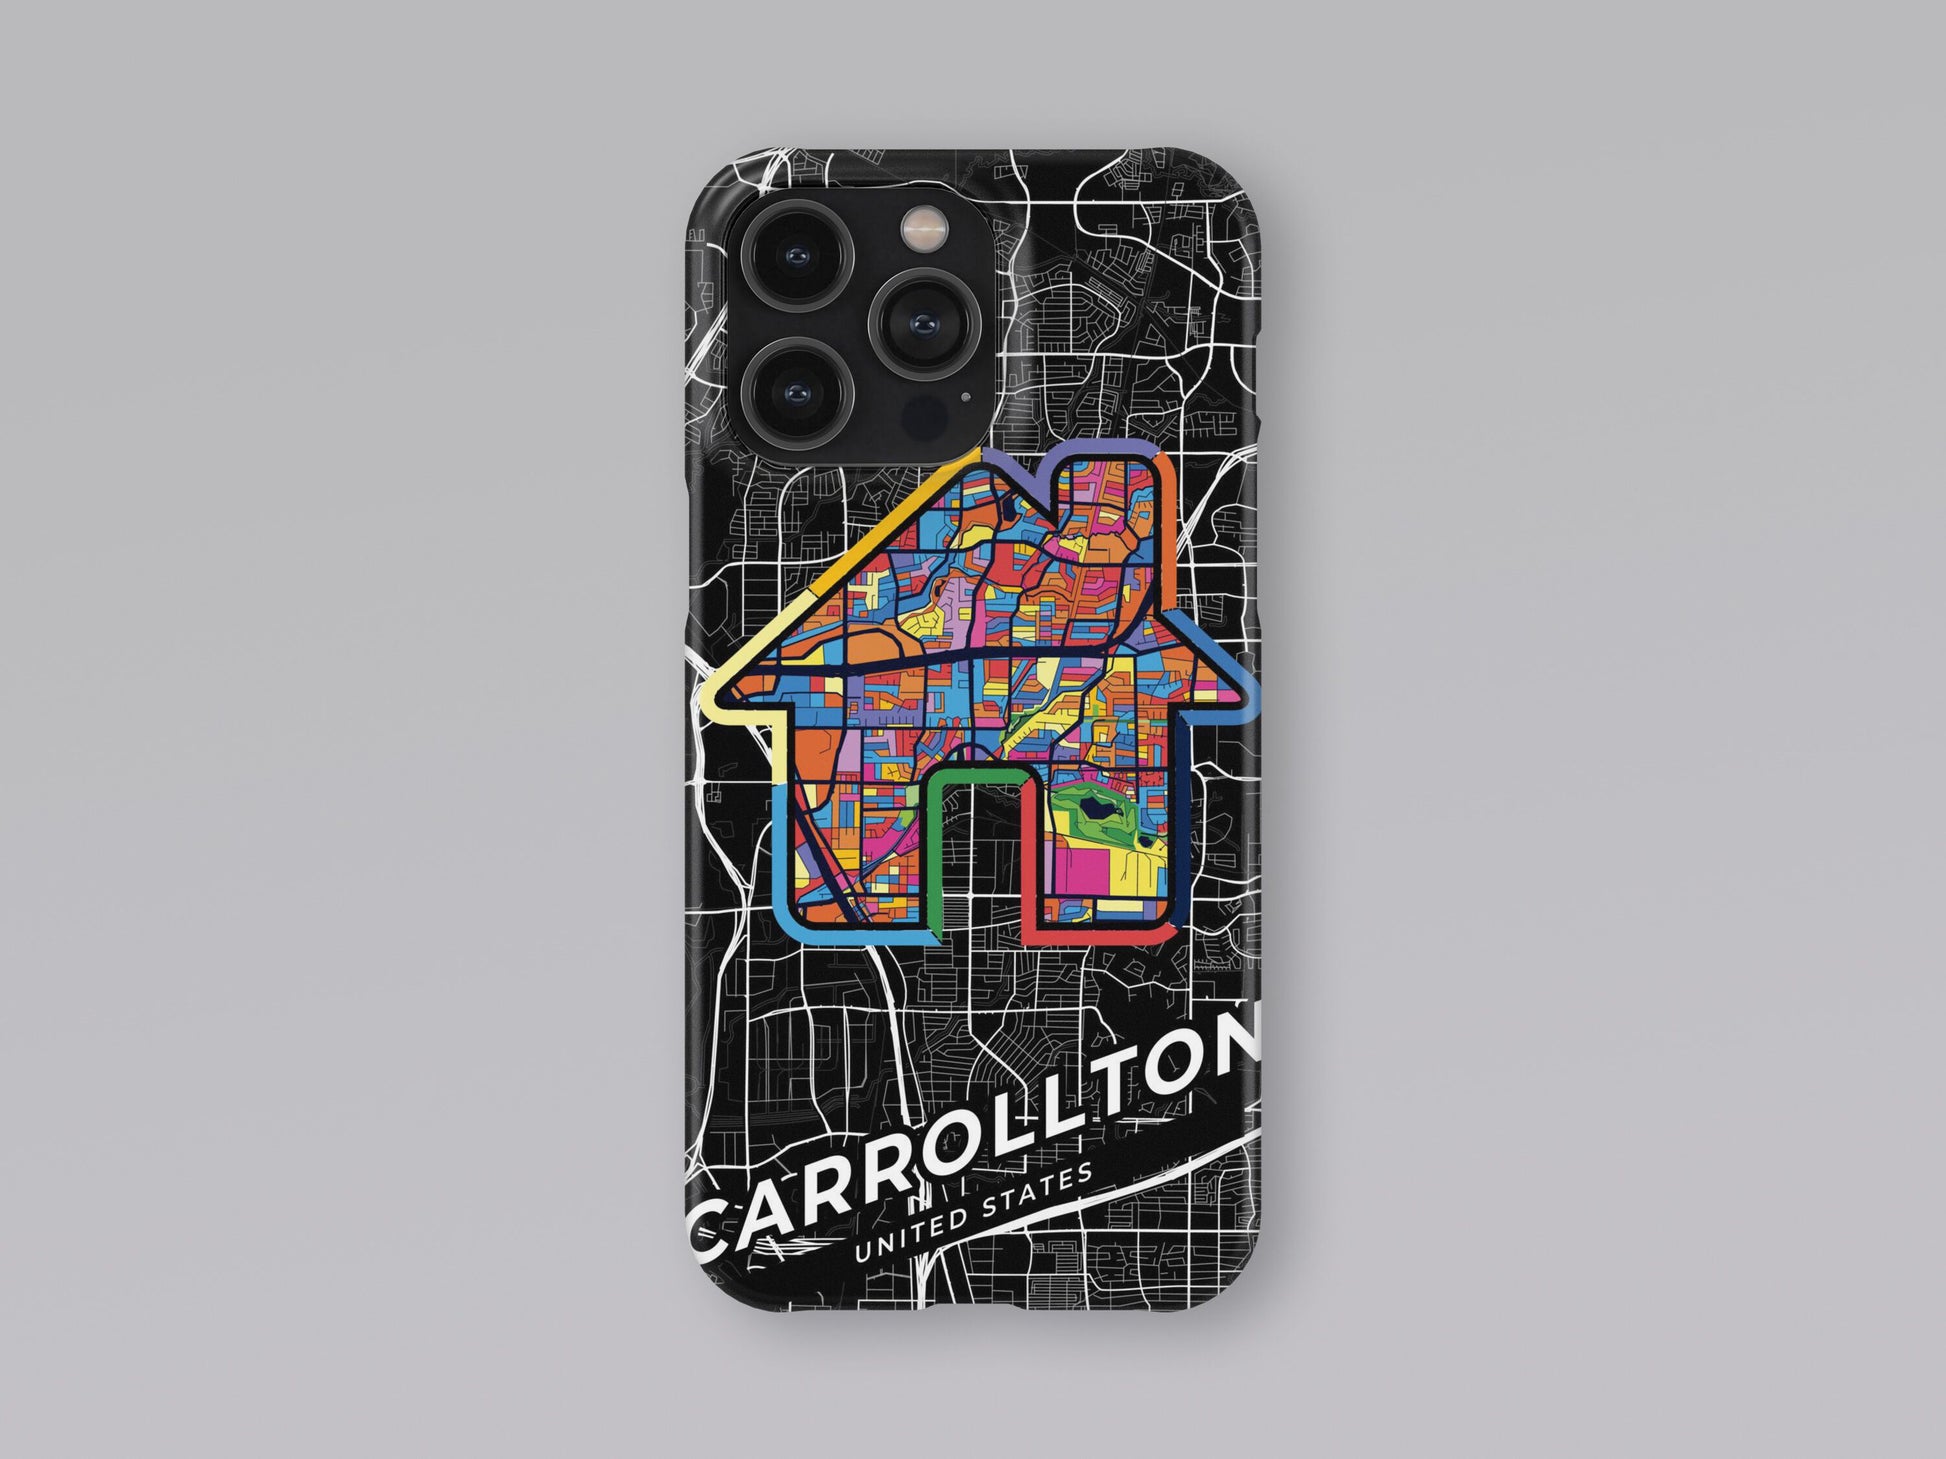 Carrollton Texas slim phone case with colorful icon. Birthday, wedding or housewarming gift. Couple match cases. 3